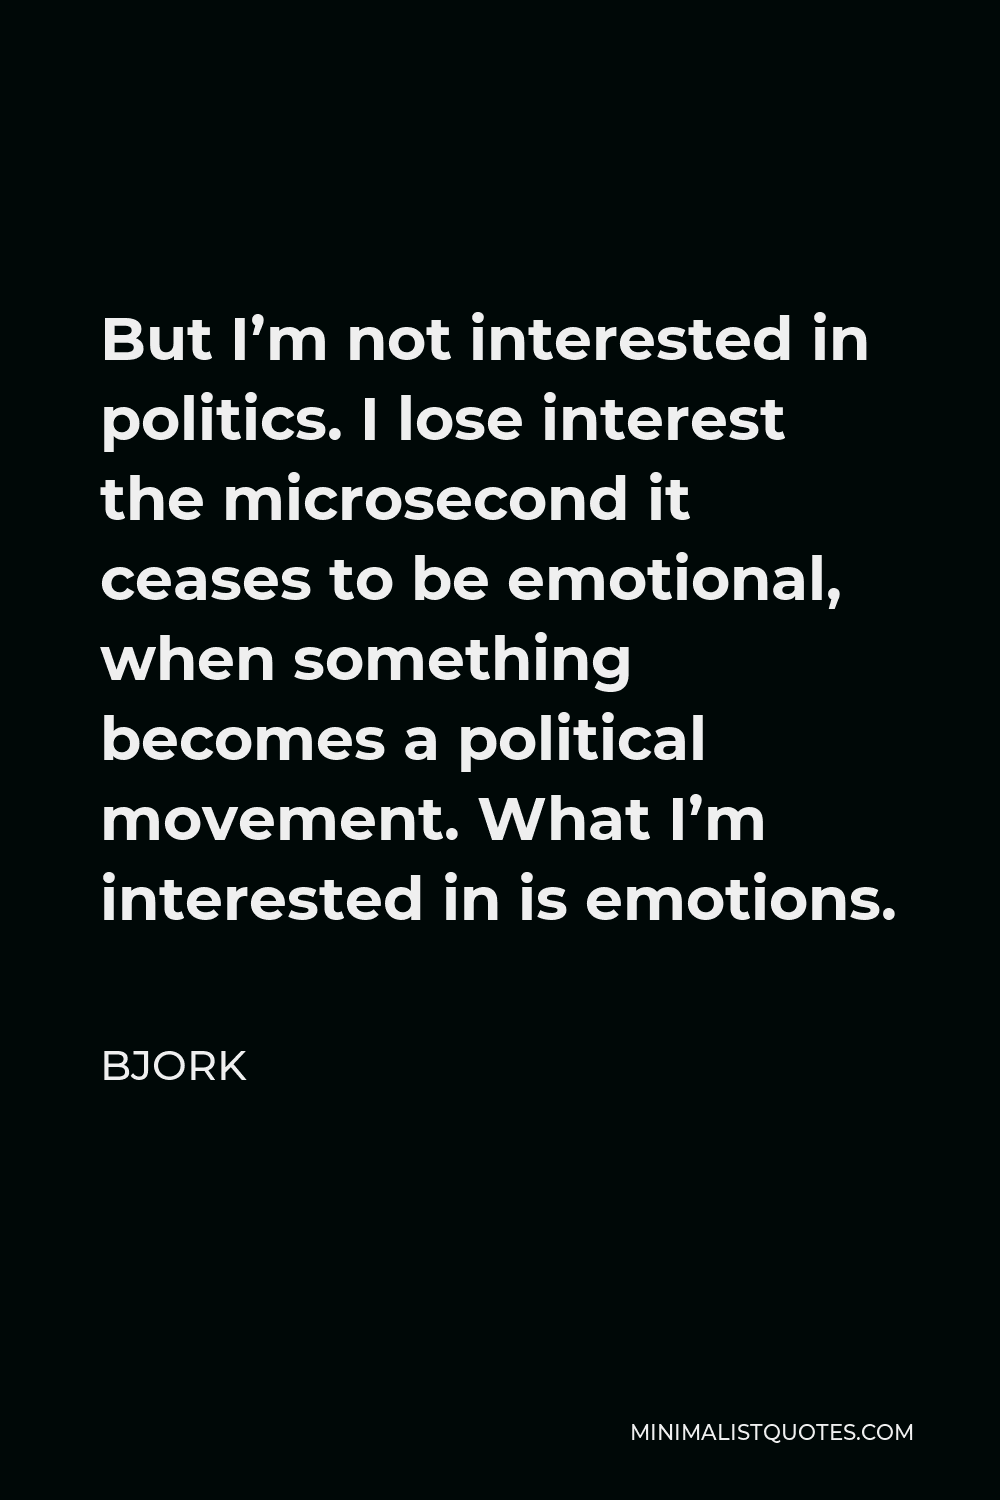 Bjork Quote - But I’m not interested in politics. I lose interest the microsecond it ceases to be emotional, when something becomes a political movement. What I’m interested in is emotions.